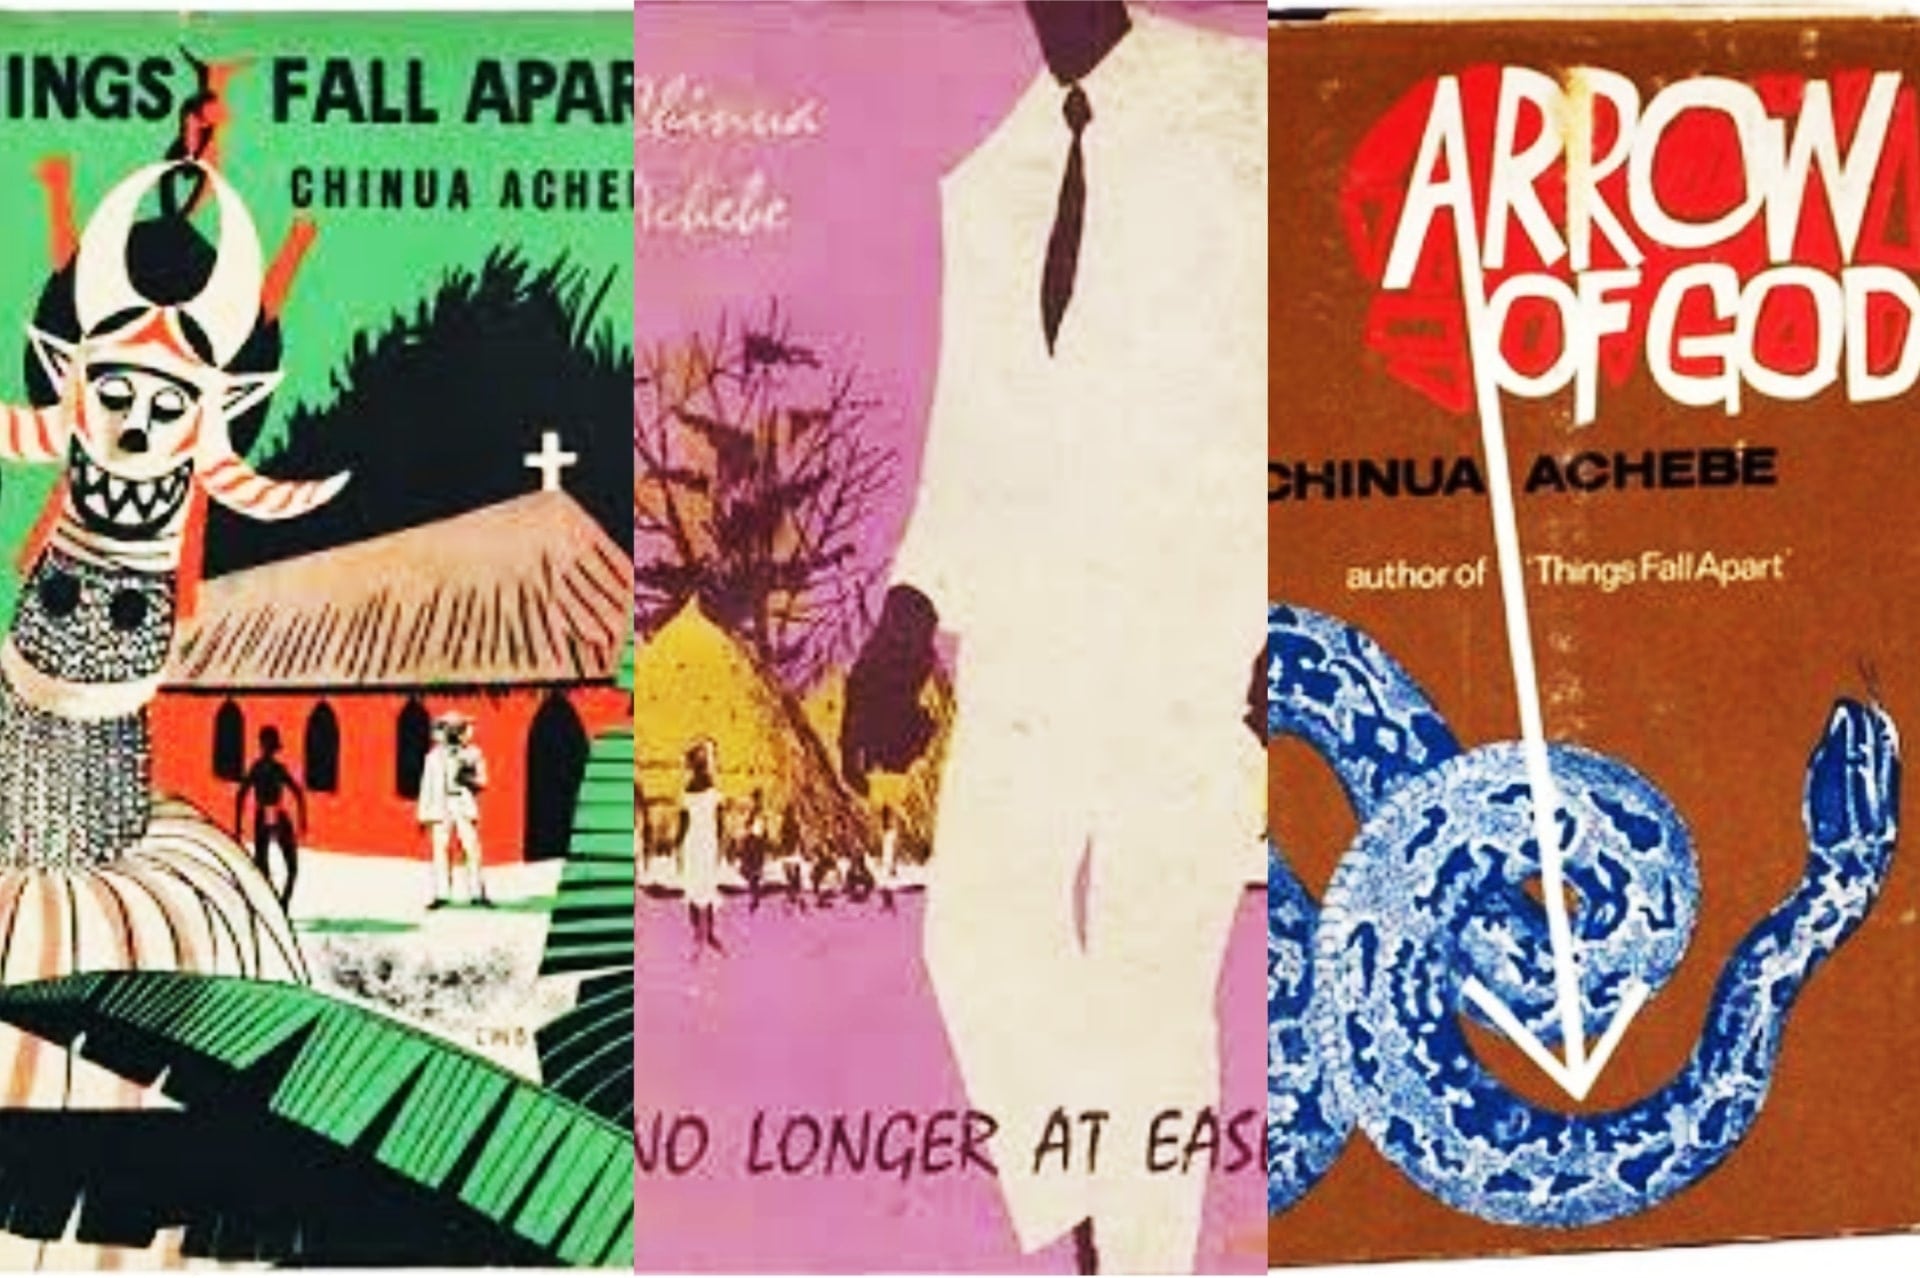 Novels by Chinua Achebe that are coming as TV series